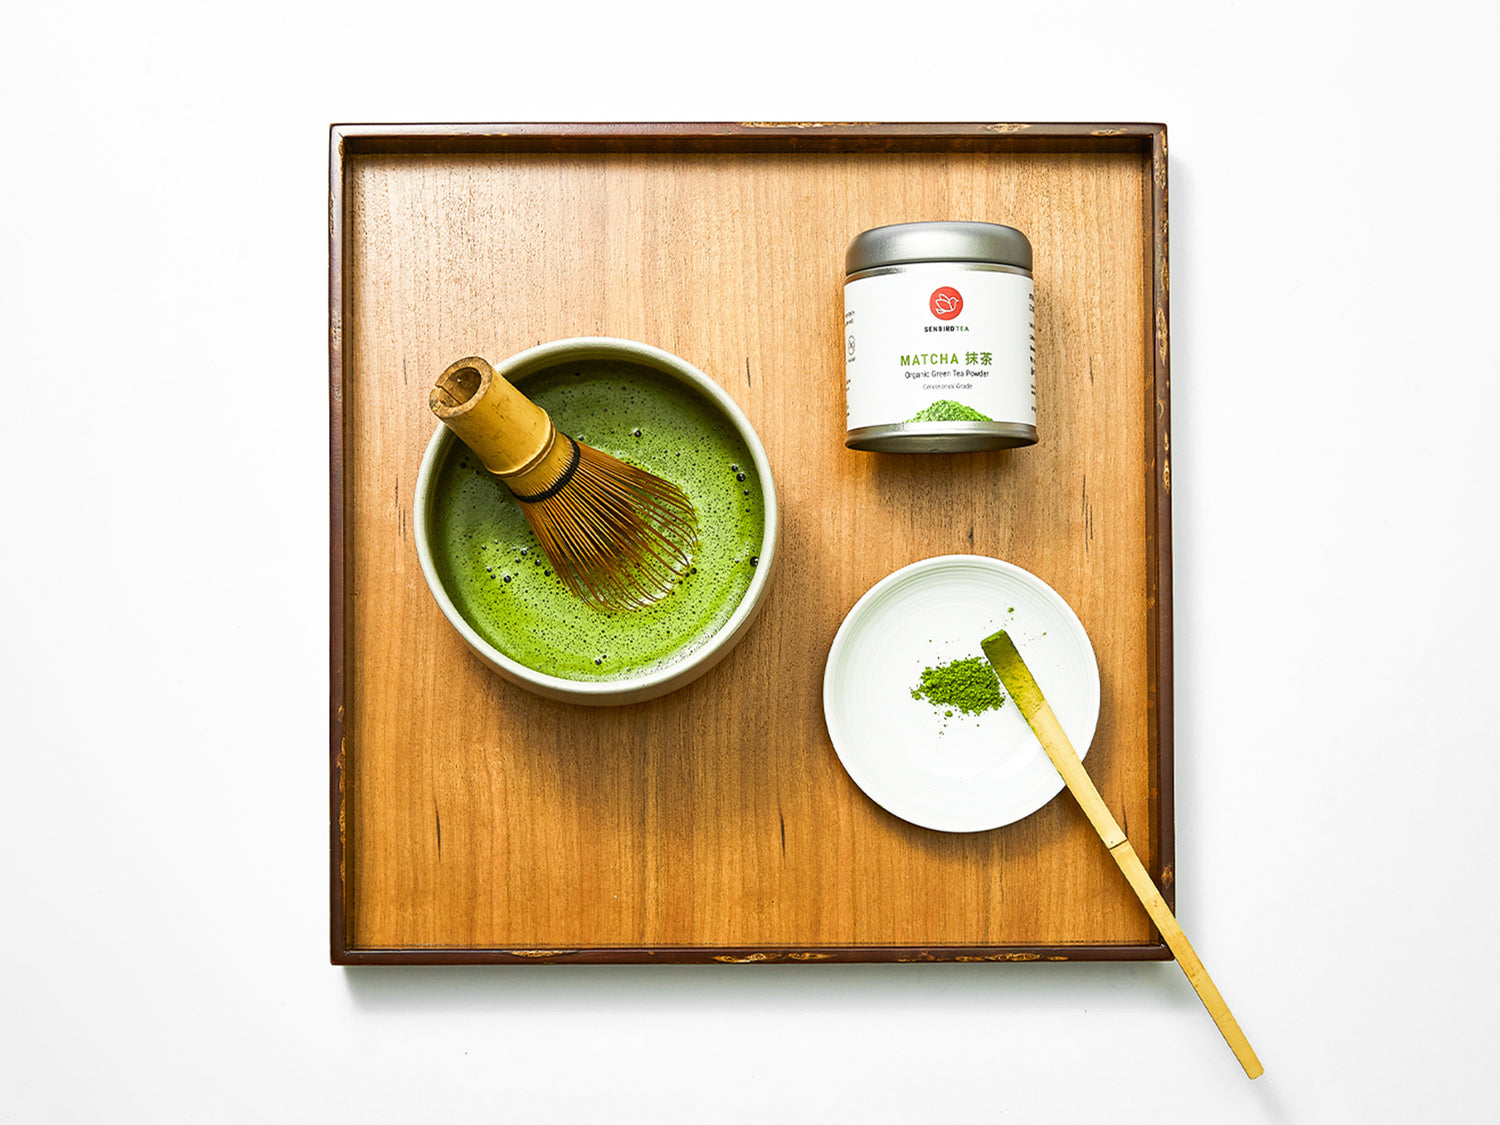 matcha tea powder tin, bamboo whisk stirring tea in a match bowl & bamboo scoop with tea powder in a plate